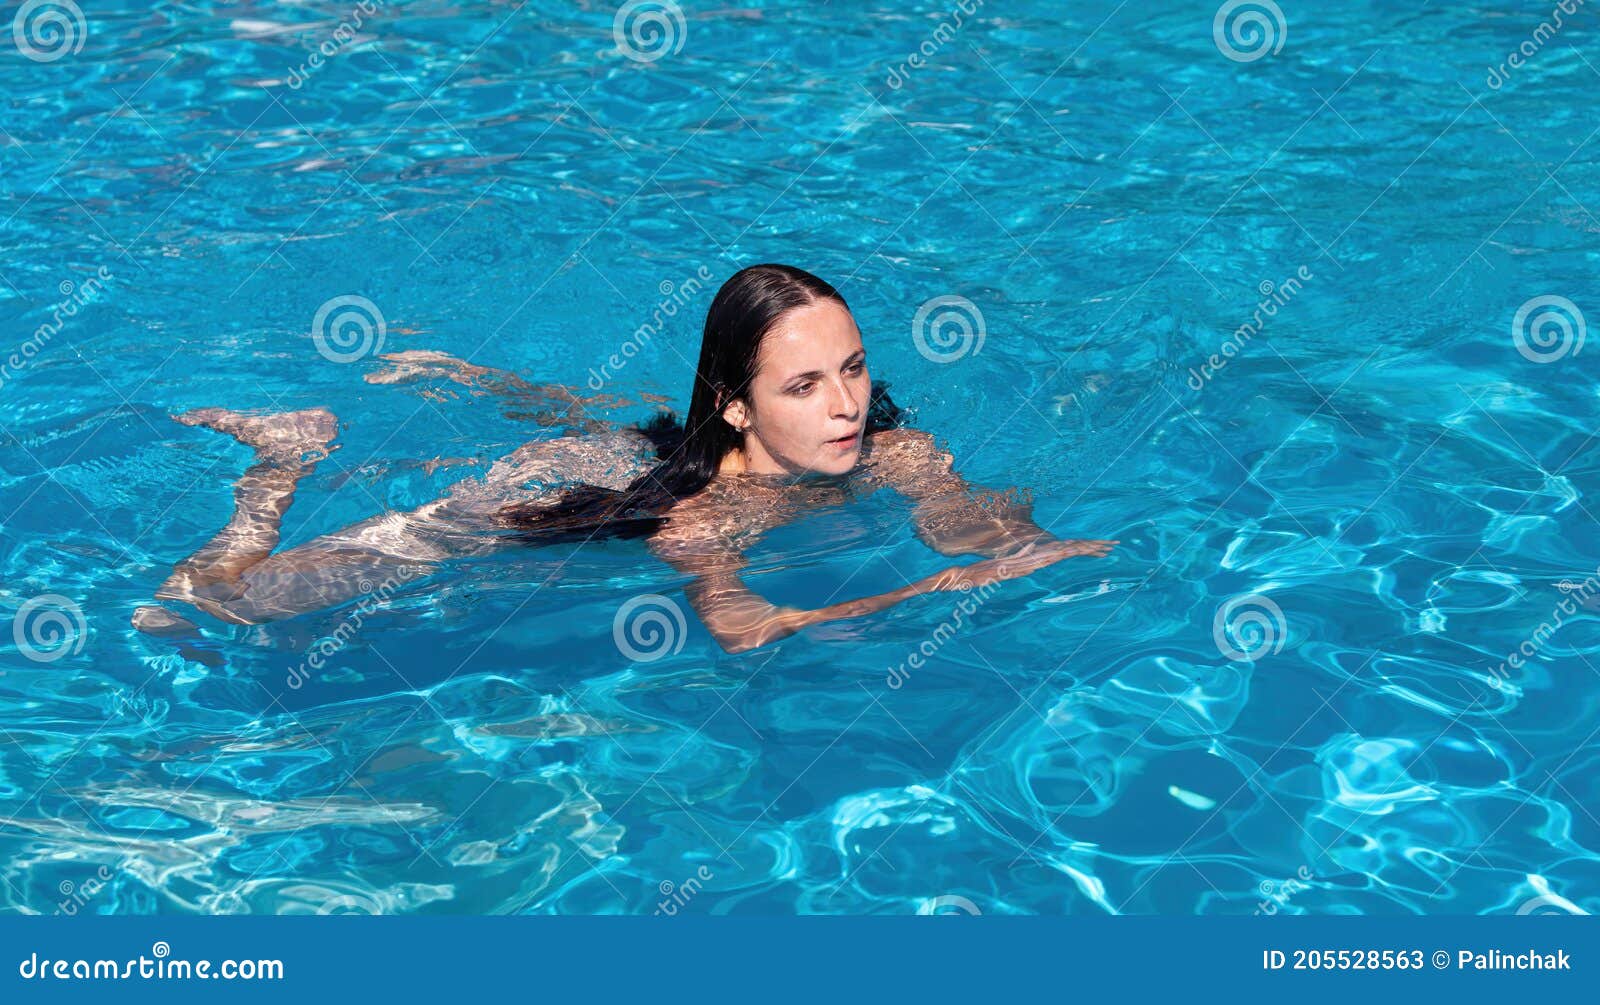 Naked women swimming pool swimming stock photos, pictures